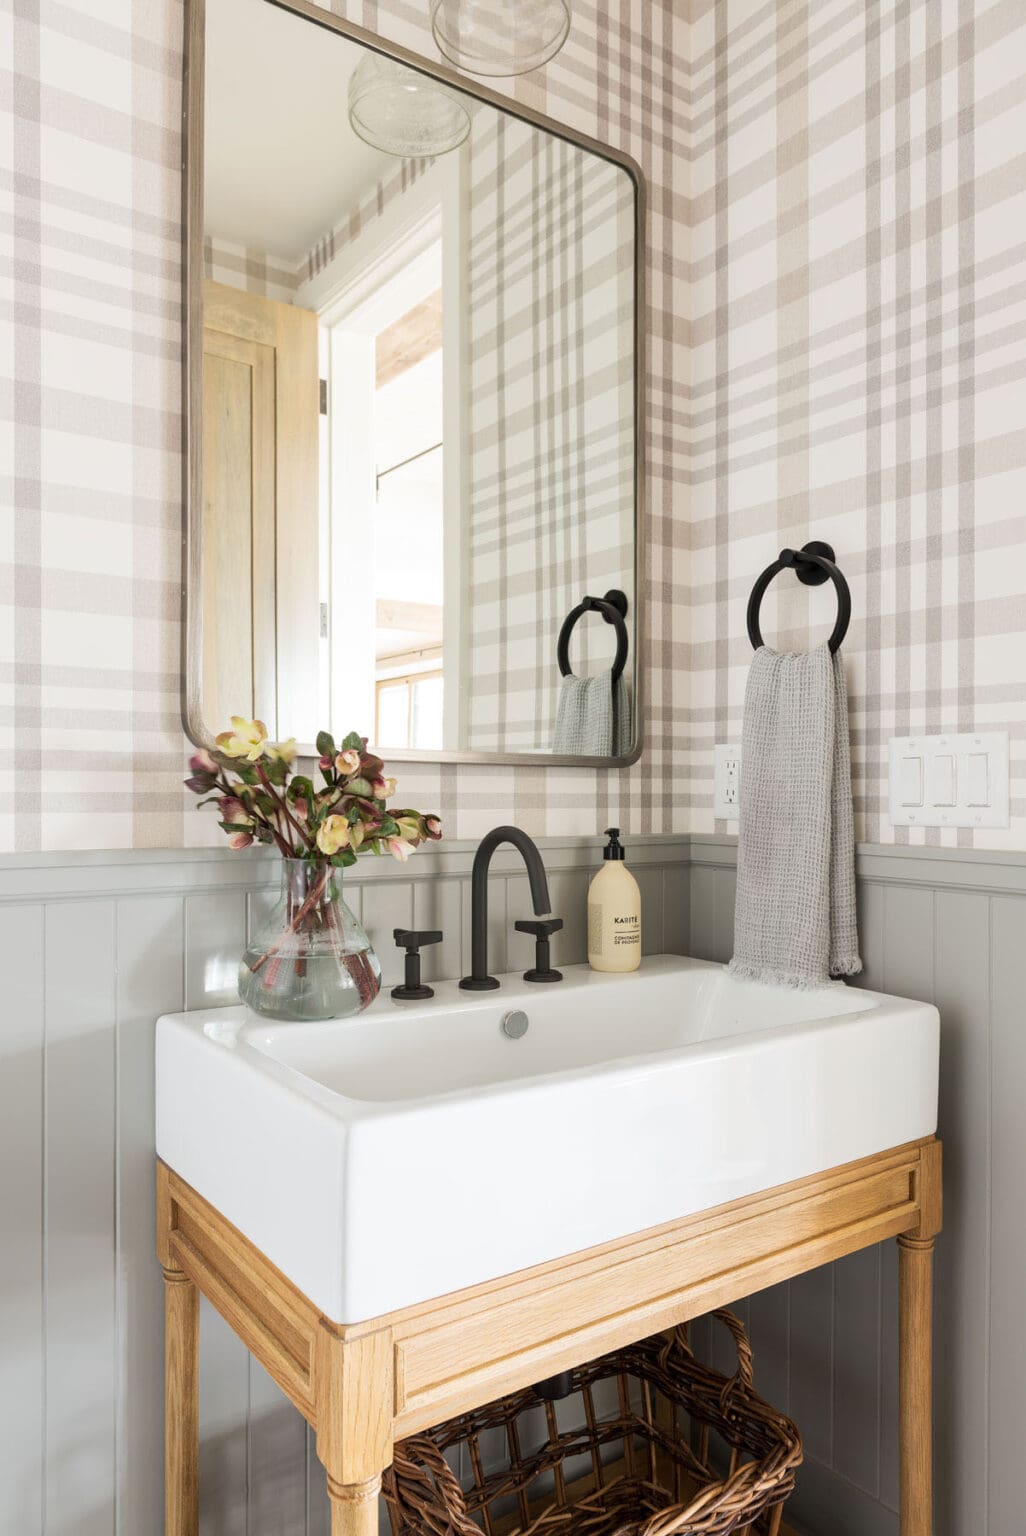 plaid wallpaper, vertical shiplap walls painted a taupe color, black hardware in this farmhouse powder room.